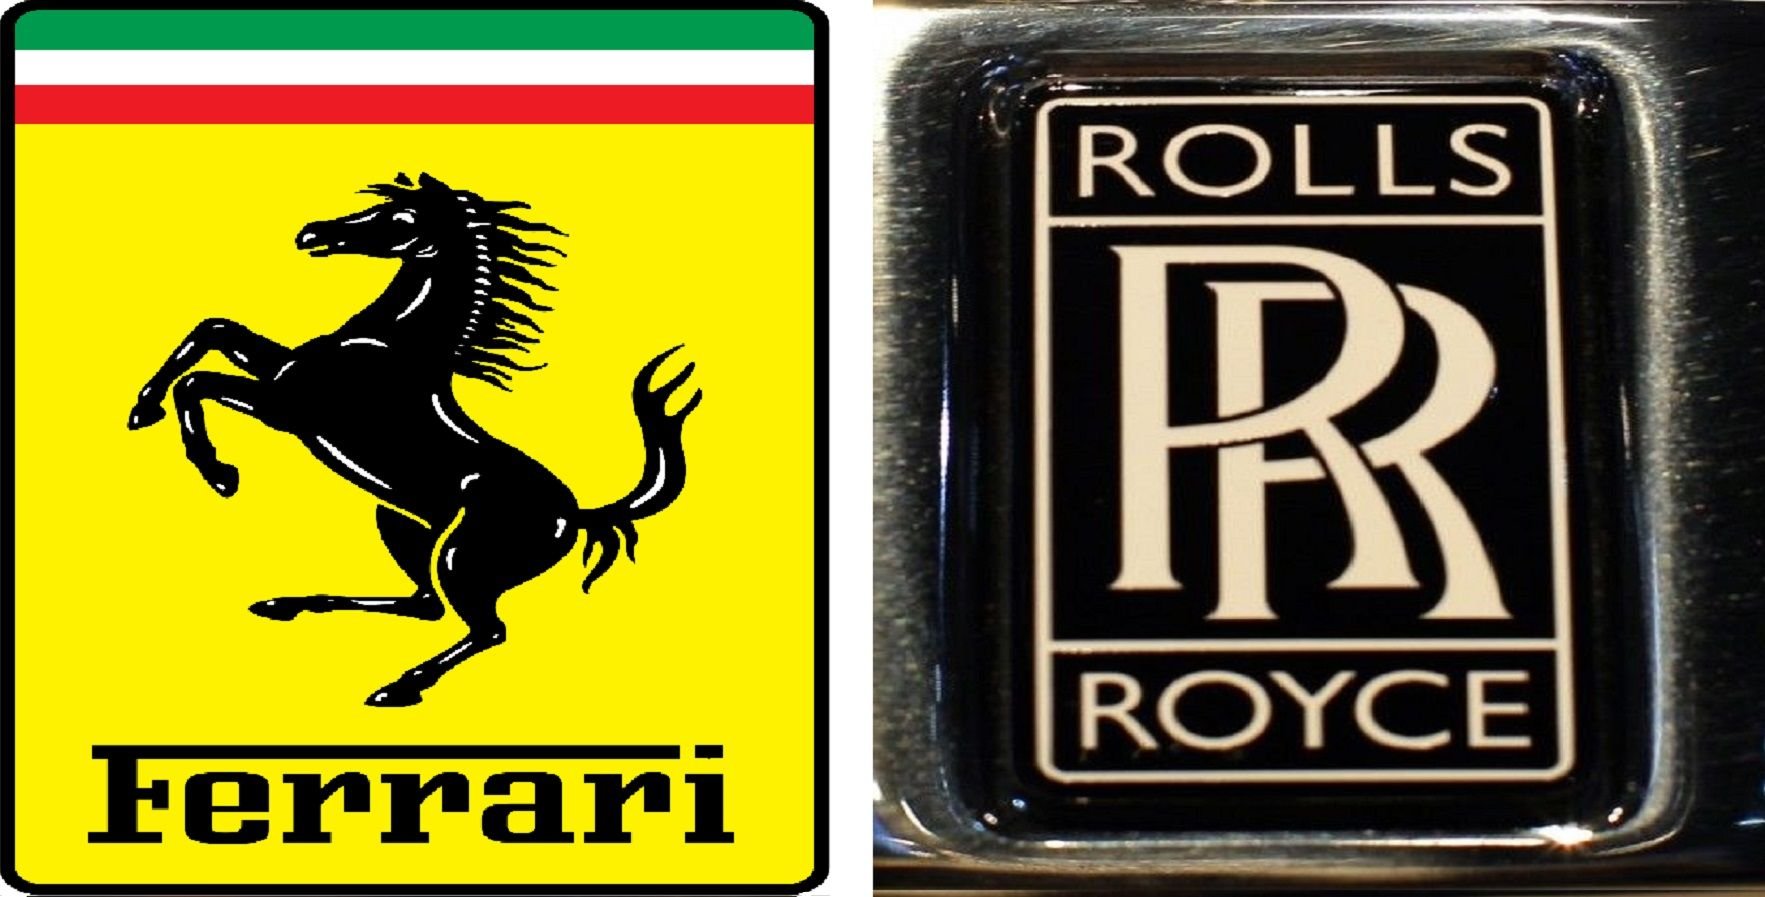 10 Best Car Logos of All Time (And Their Meanings)